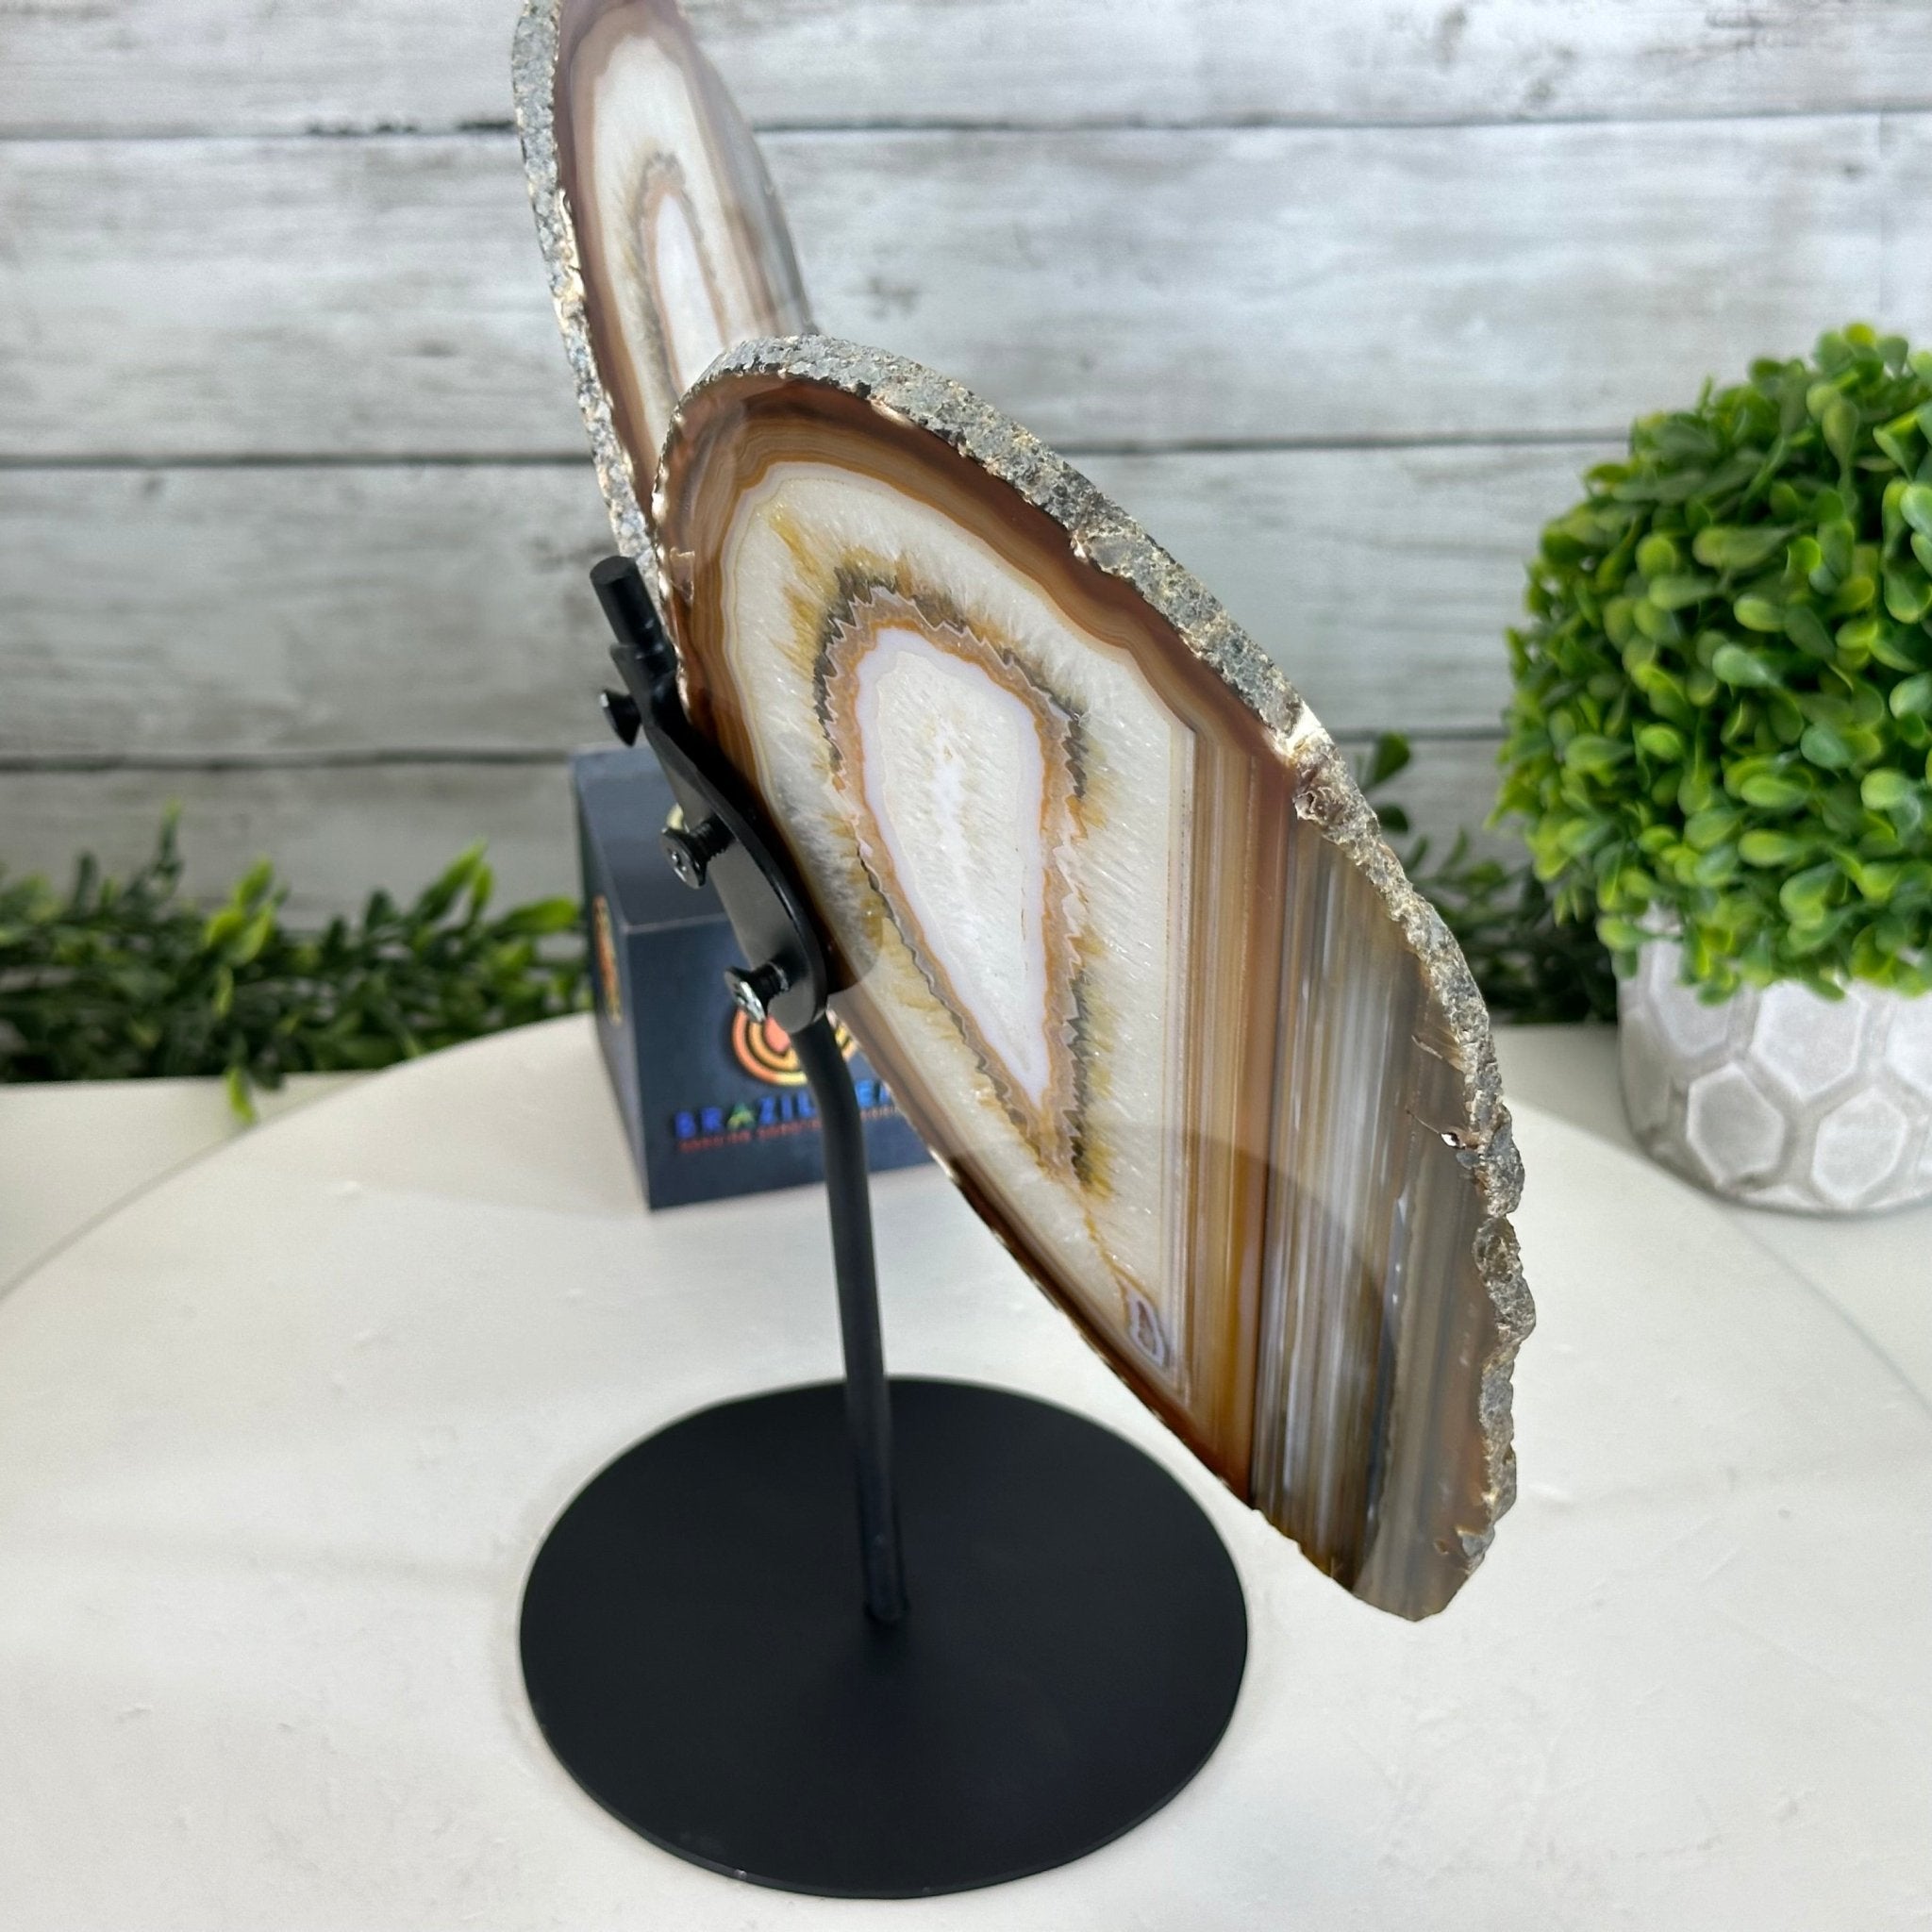 Natural Brazilian Agate "Butterfly Wings", 10.1" Tall #5050NA-130 - Brazil GemsBrazil GemsNatural Brazilian Agate "Butterfly Wings", 10.1" Tall #5050NA-130Agate Butterfly Wings5050NA-130